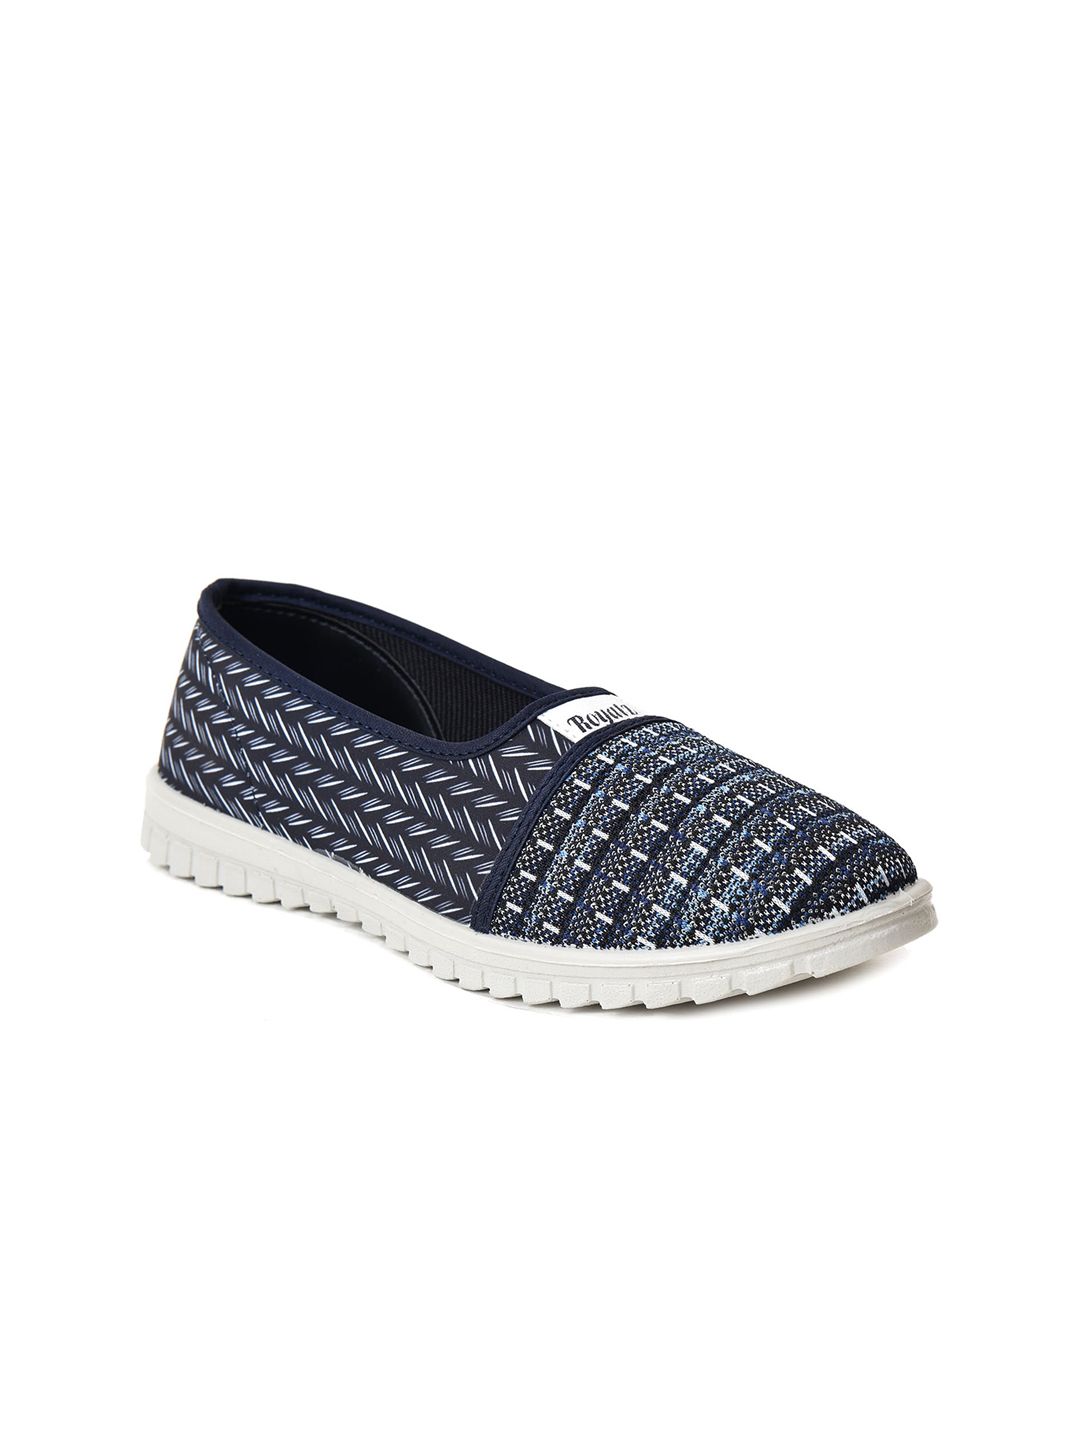 Ajanta Women Printed Lightweight Textile Comfort Insole Basics Slip-On Sneakers Price in India